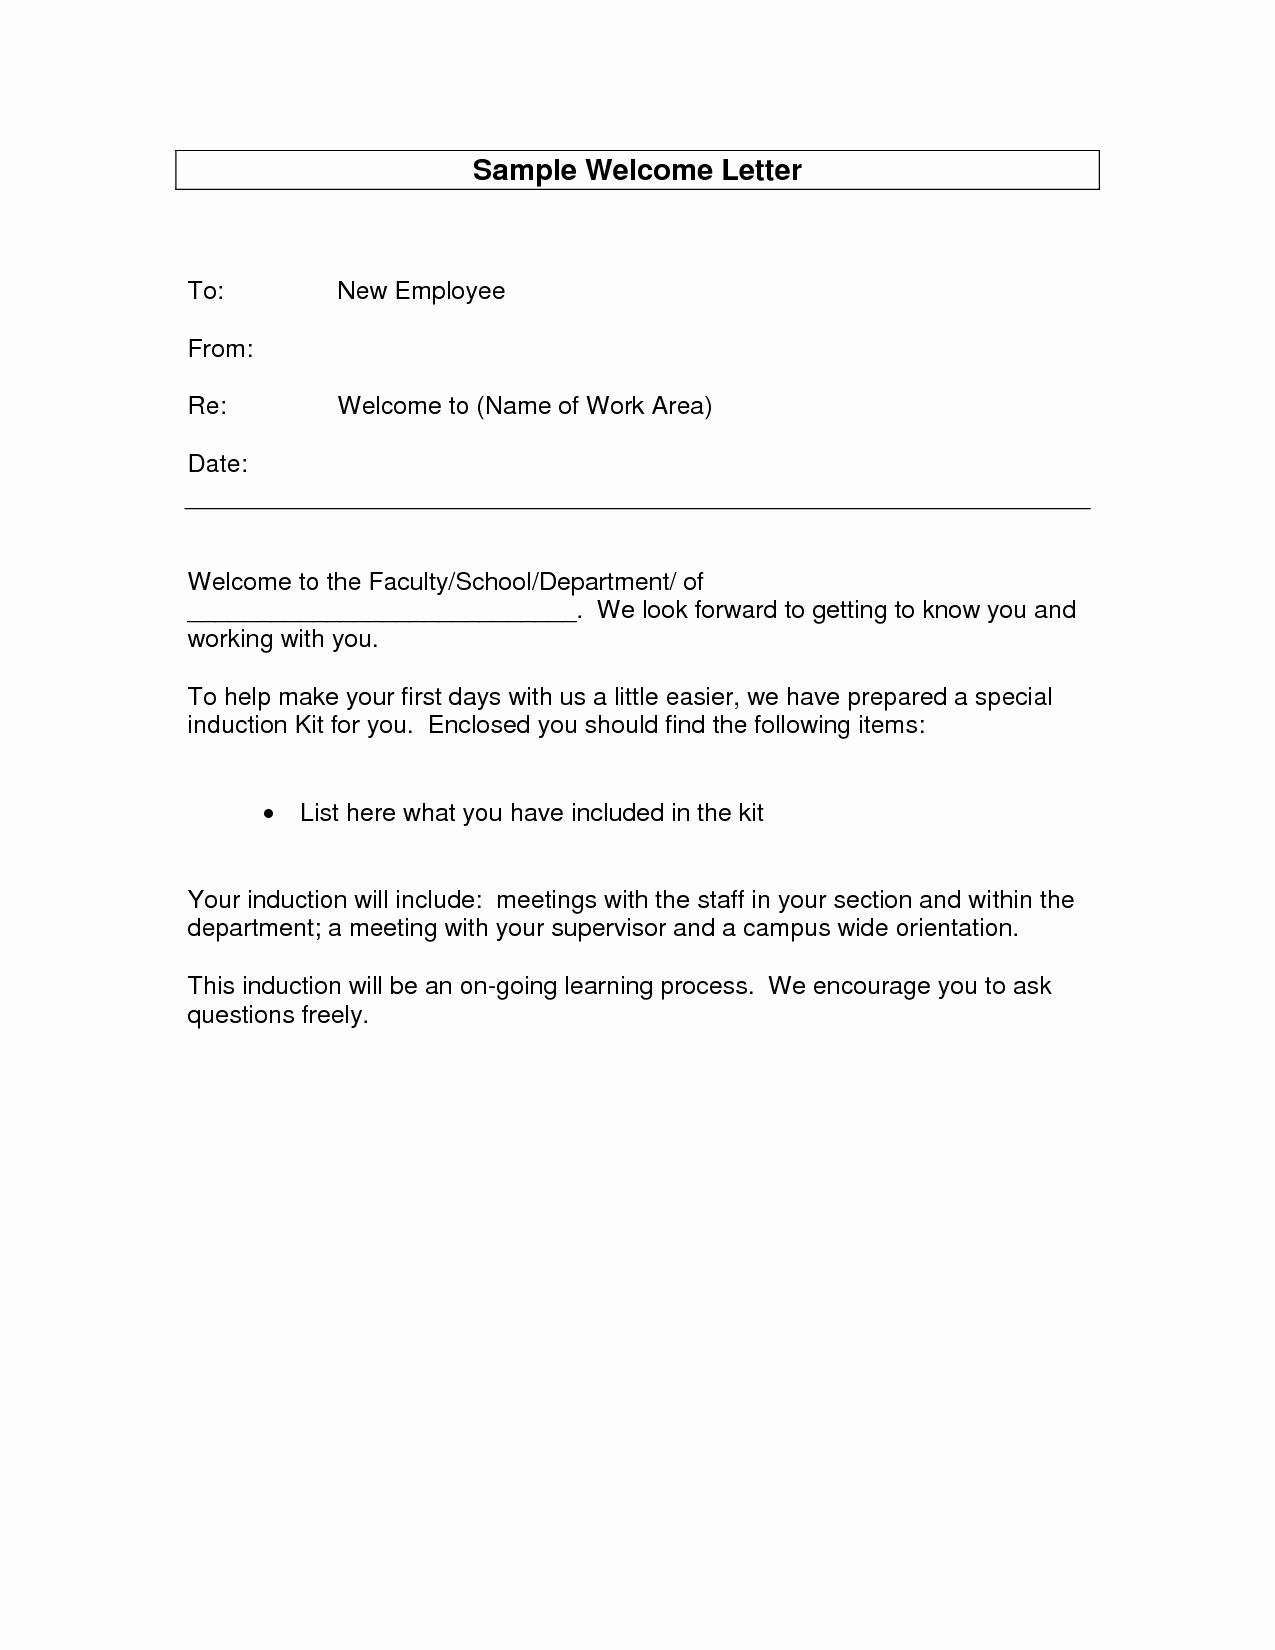 New Hire Letter Samples Beautiful Wel E Email to New Employee From Hr